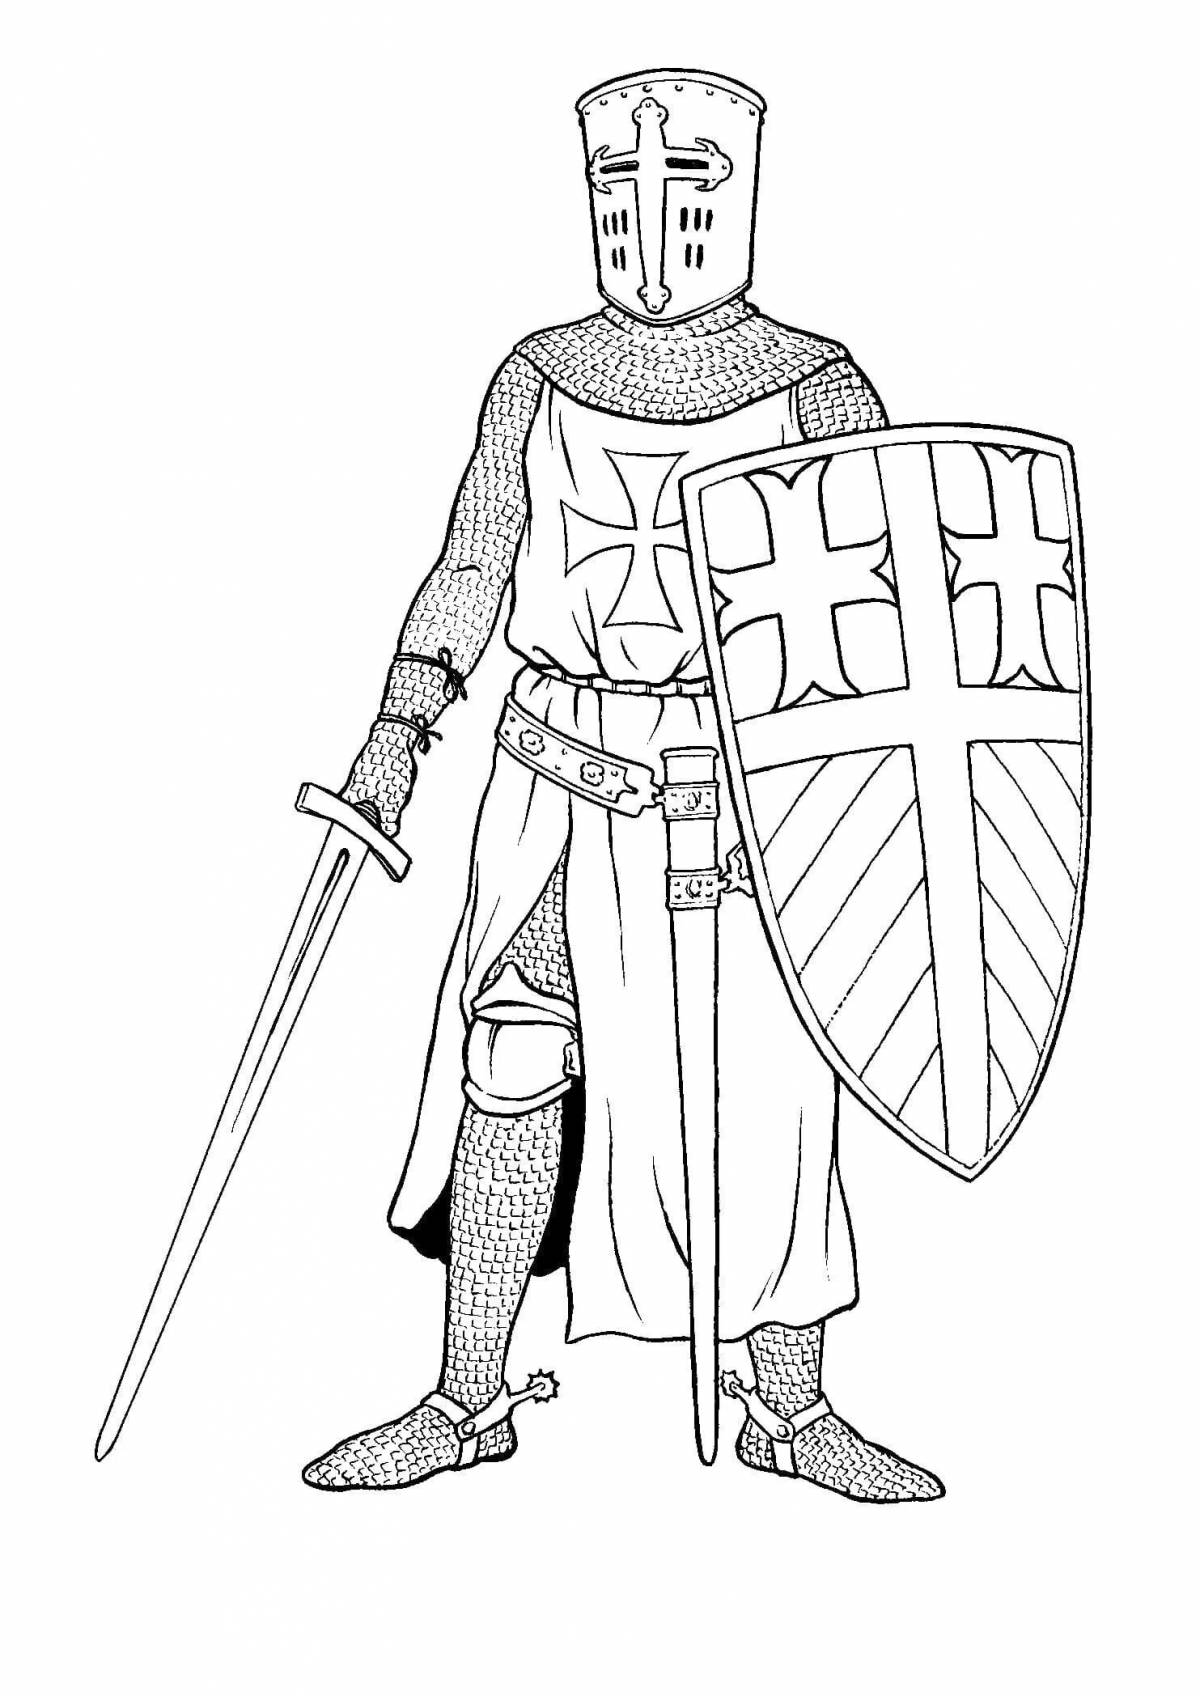 Playful medieval coloring page